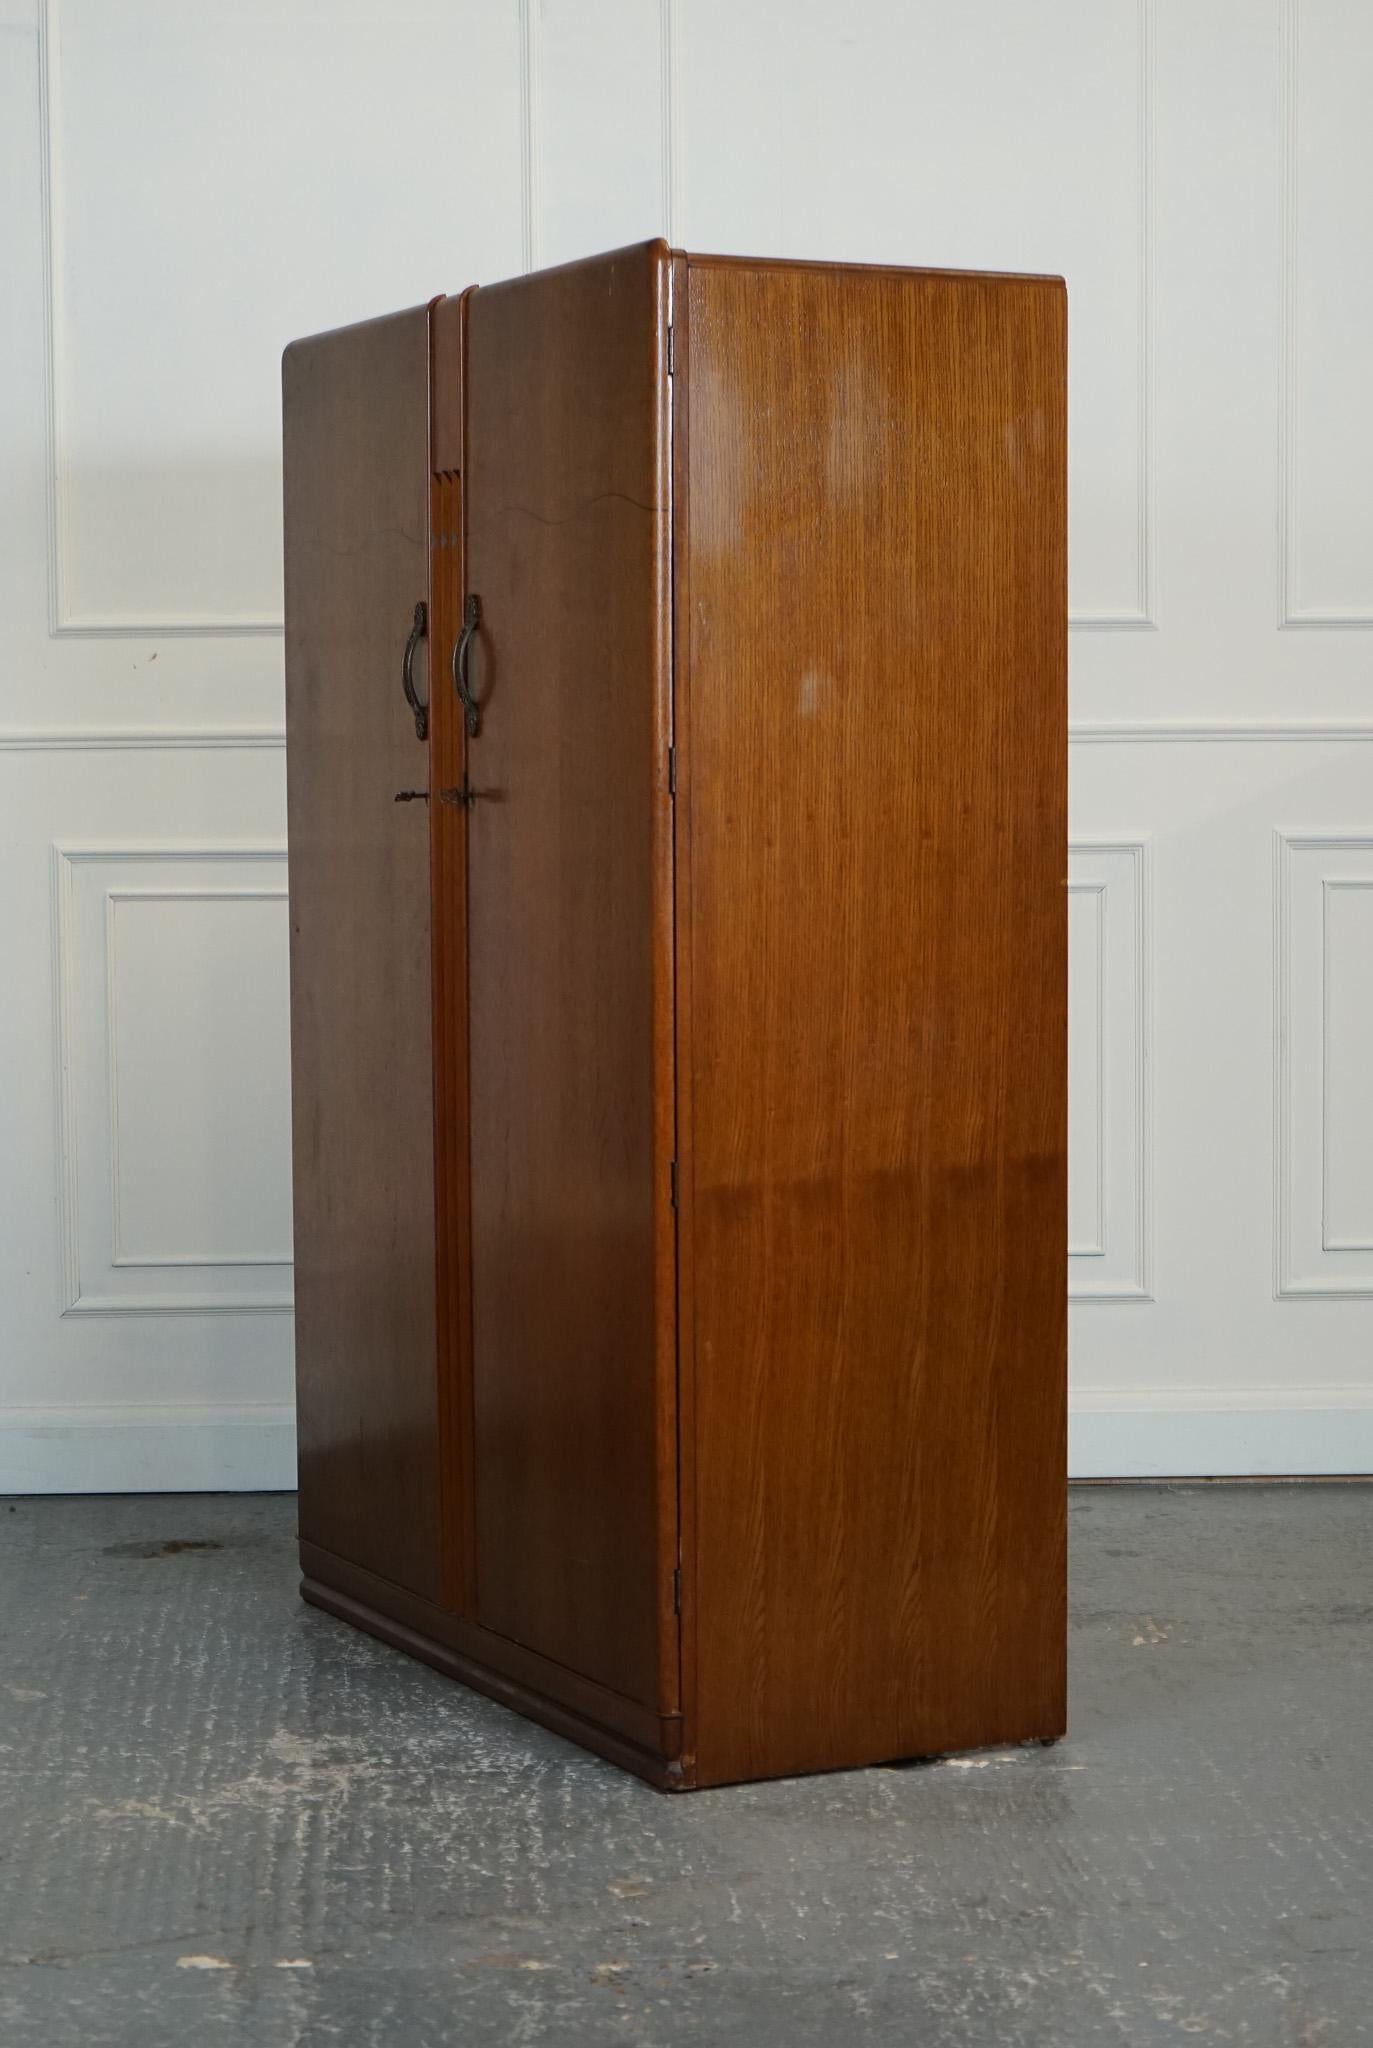 20th Century ViNTAGE ART DECO TWO DOOR WARDROBE BY LEBUS FURNITURE J1 For Sale